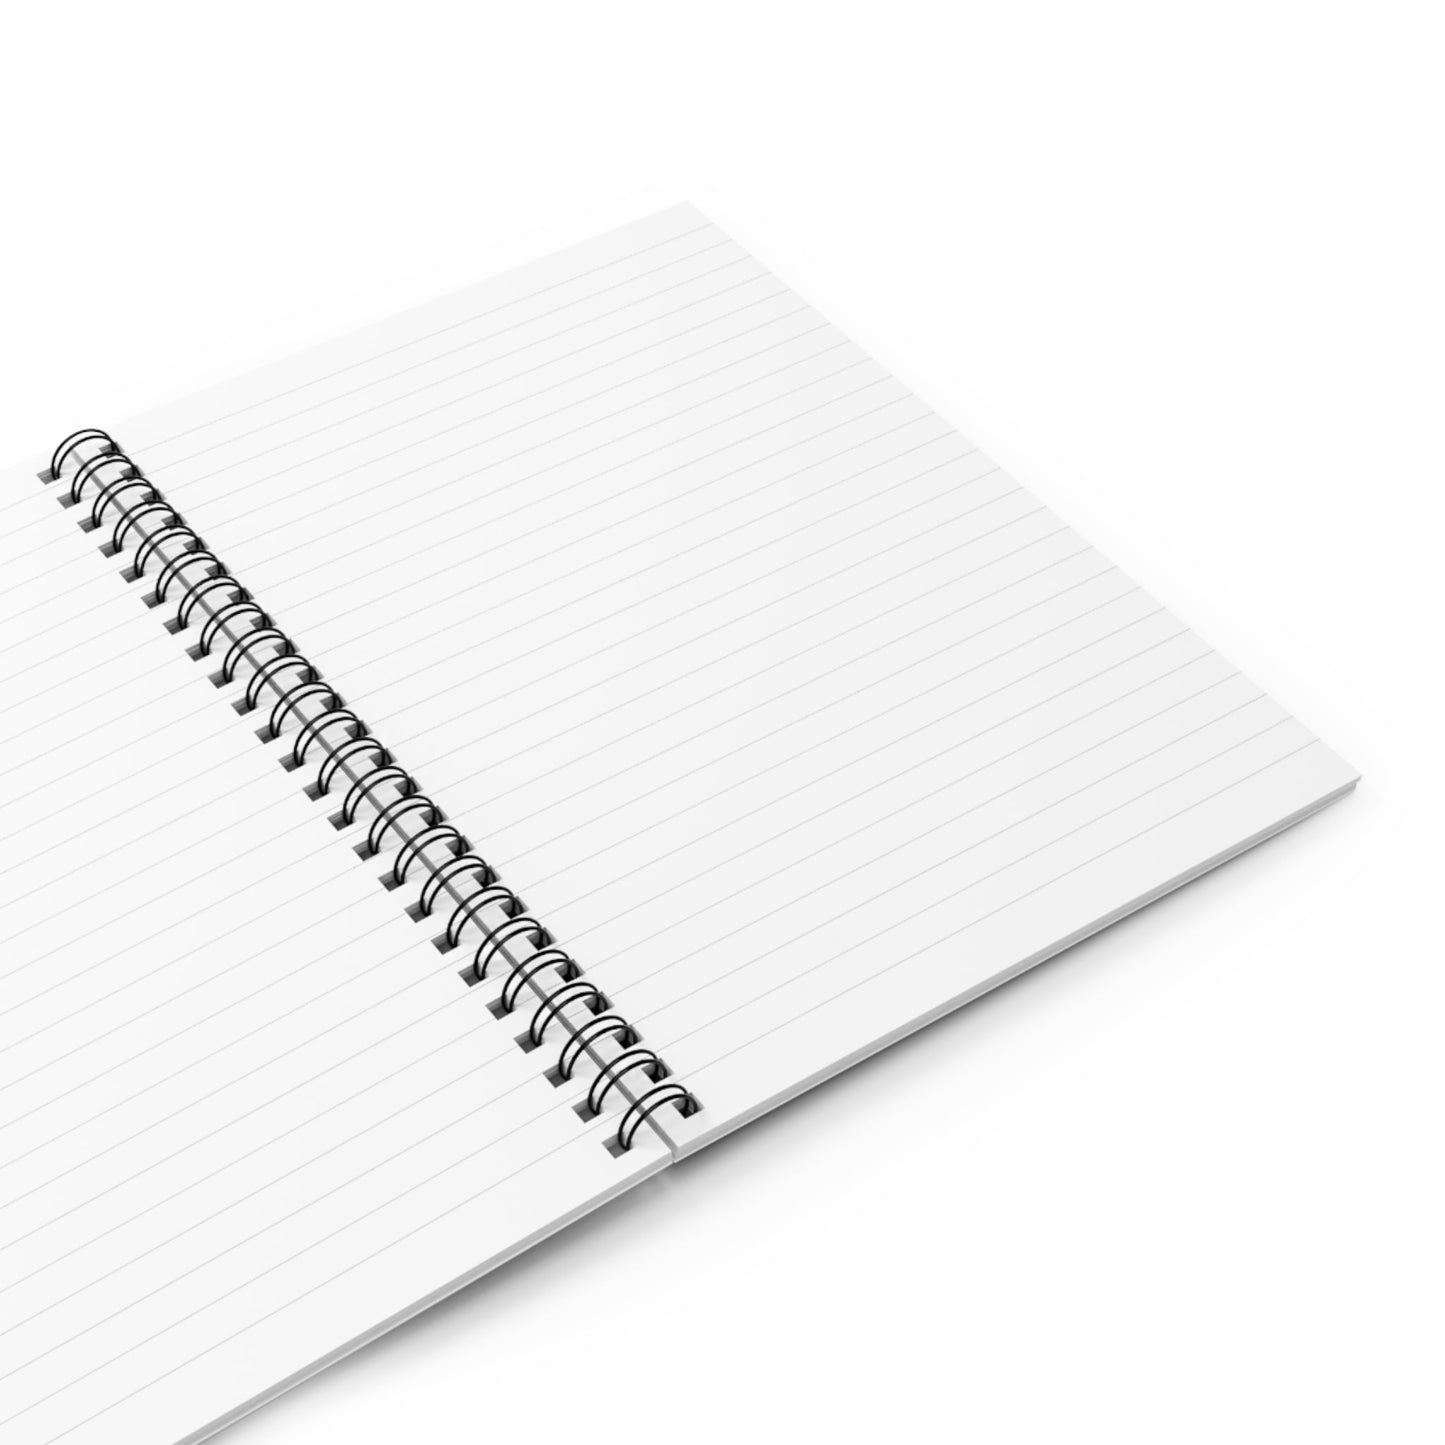 Spiral Notebook with Relaxing Tree Cover Opened with Blank White College Ruled Pages